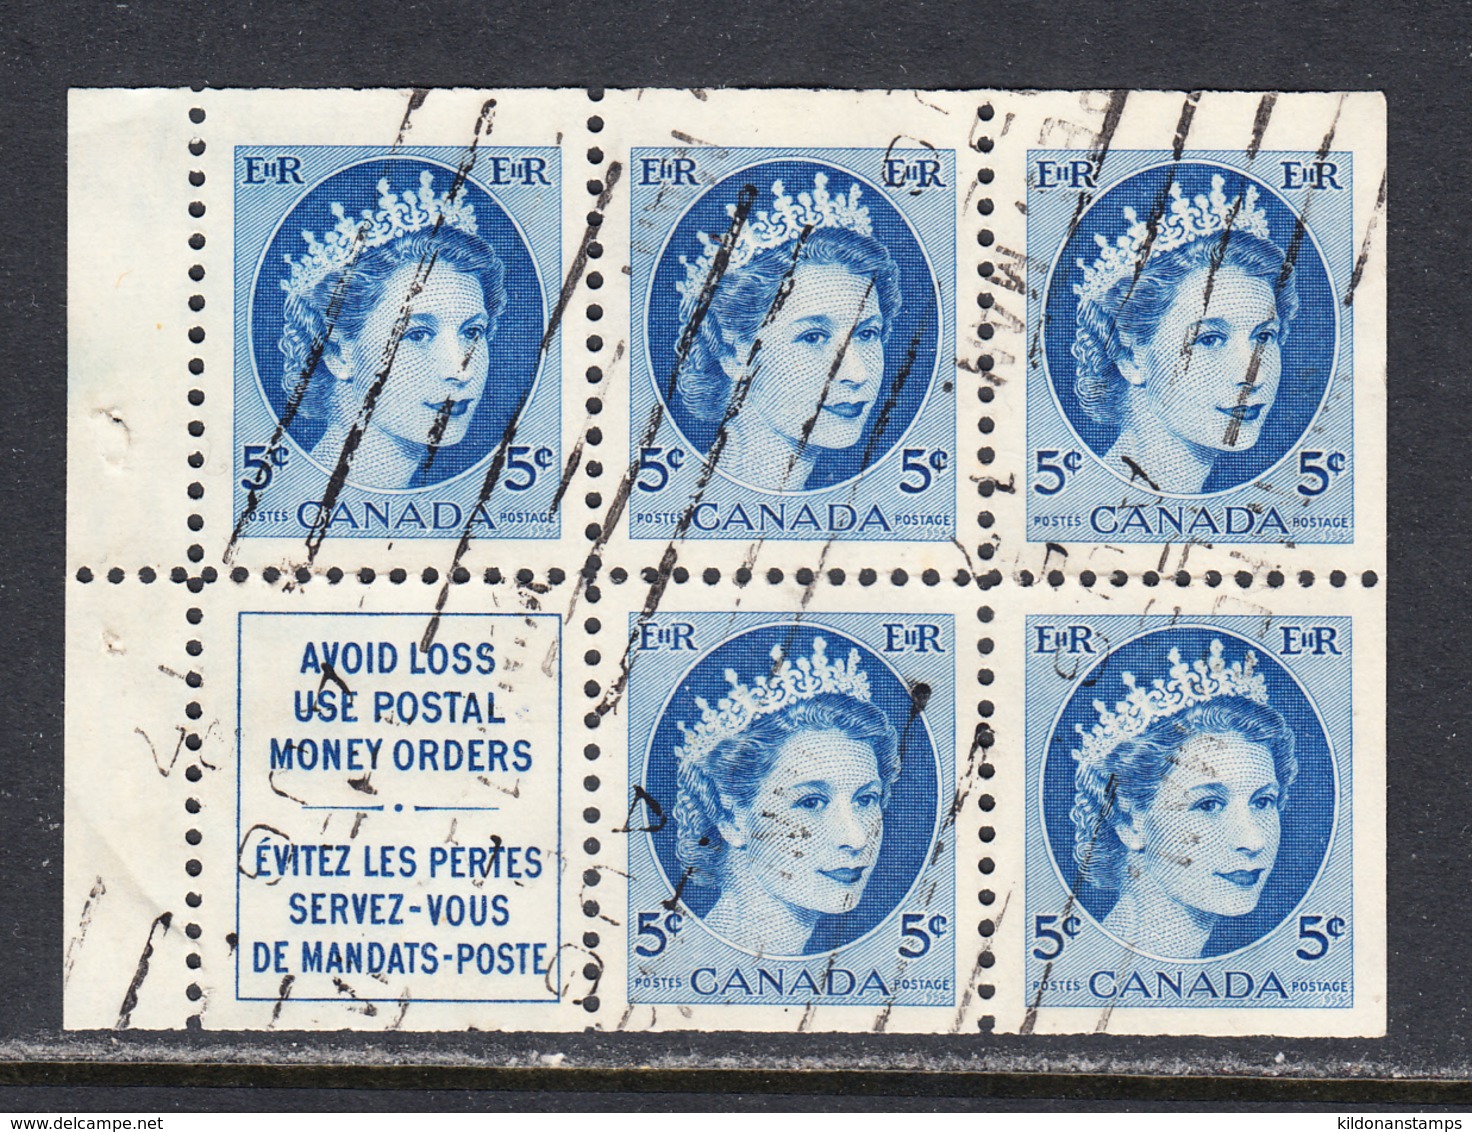 Canada 1954 Cancelled, Booklet Pane, Sc# 341a - Booklets Pages